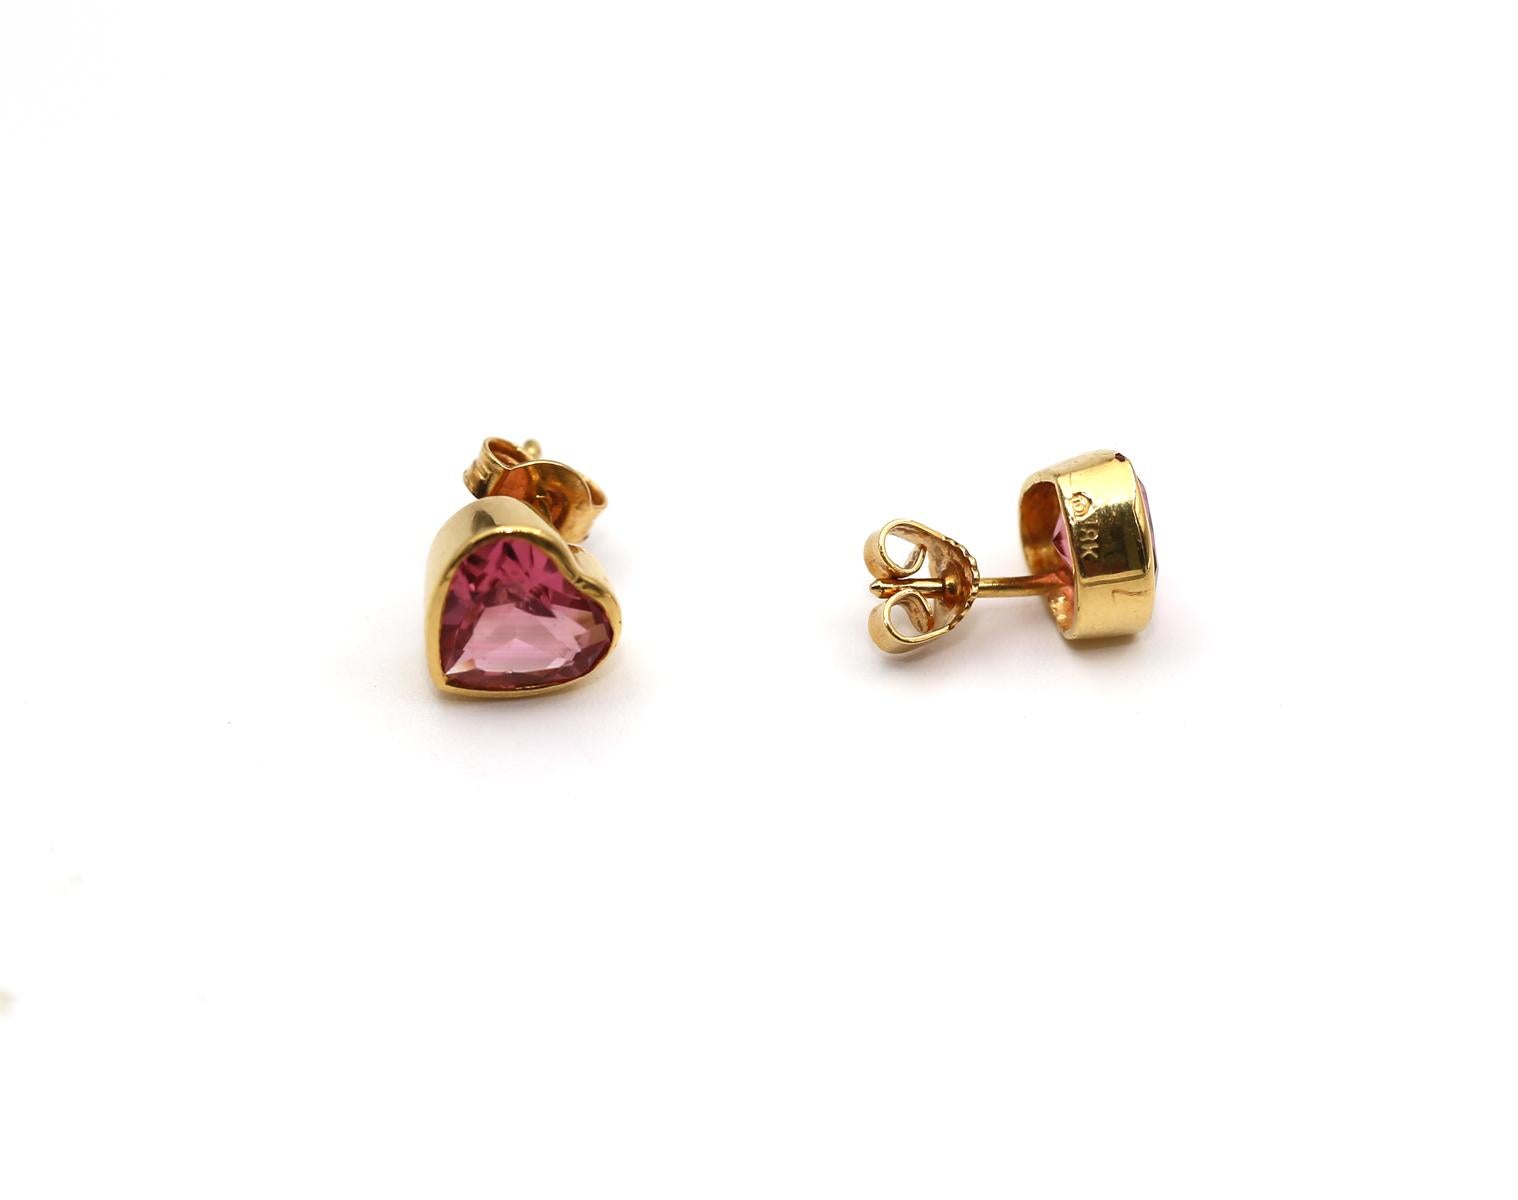 Finely and really rare Heart-shaped Tourmaline stone stud Earrings.
They sit perfectly on the ear. Bringing some style and romance to everyday outfits. 

A natural Tourmaline color is really sophisticated shade of red and purple. A unique